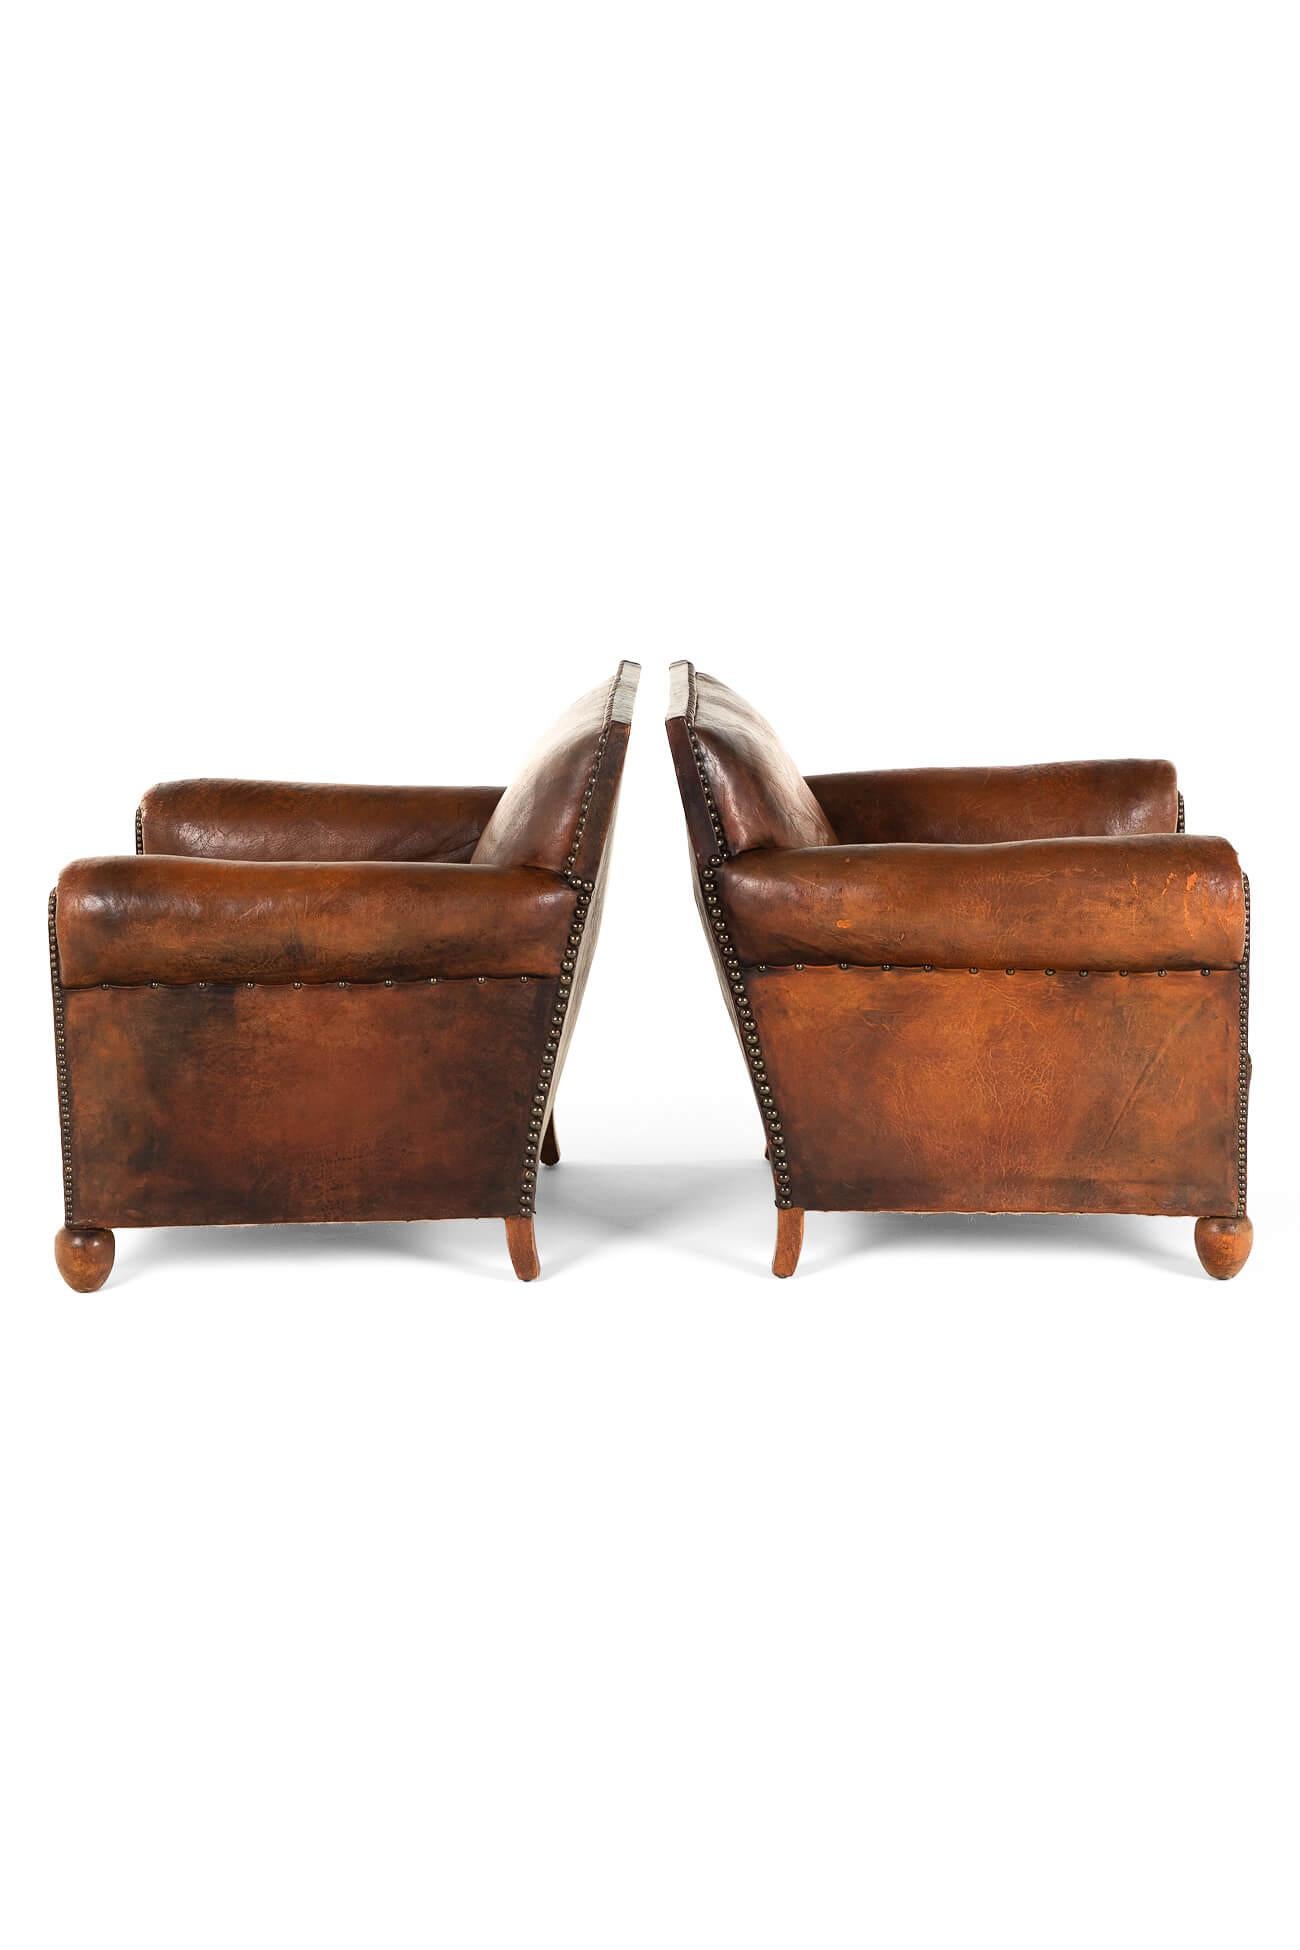 Art Deco Pair of French Leather Studded Club Chairs For Sale